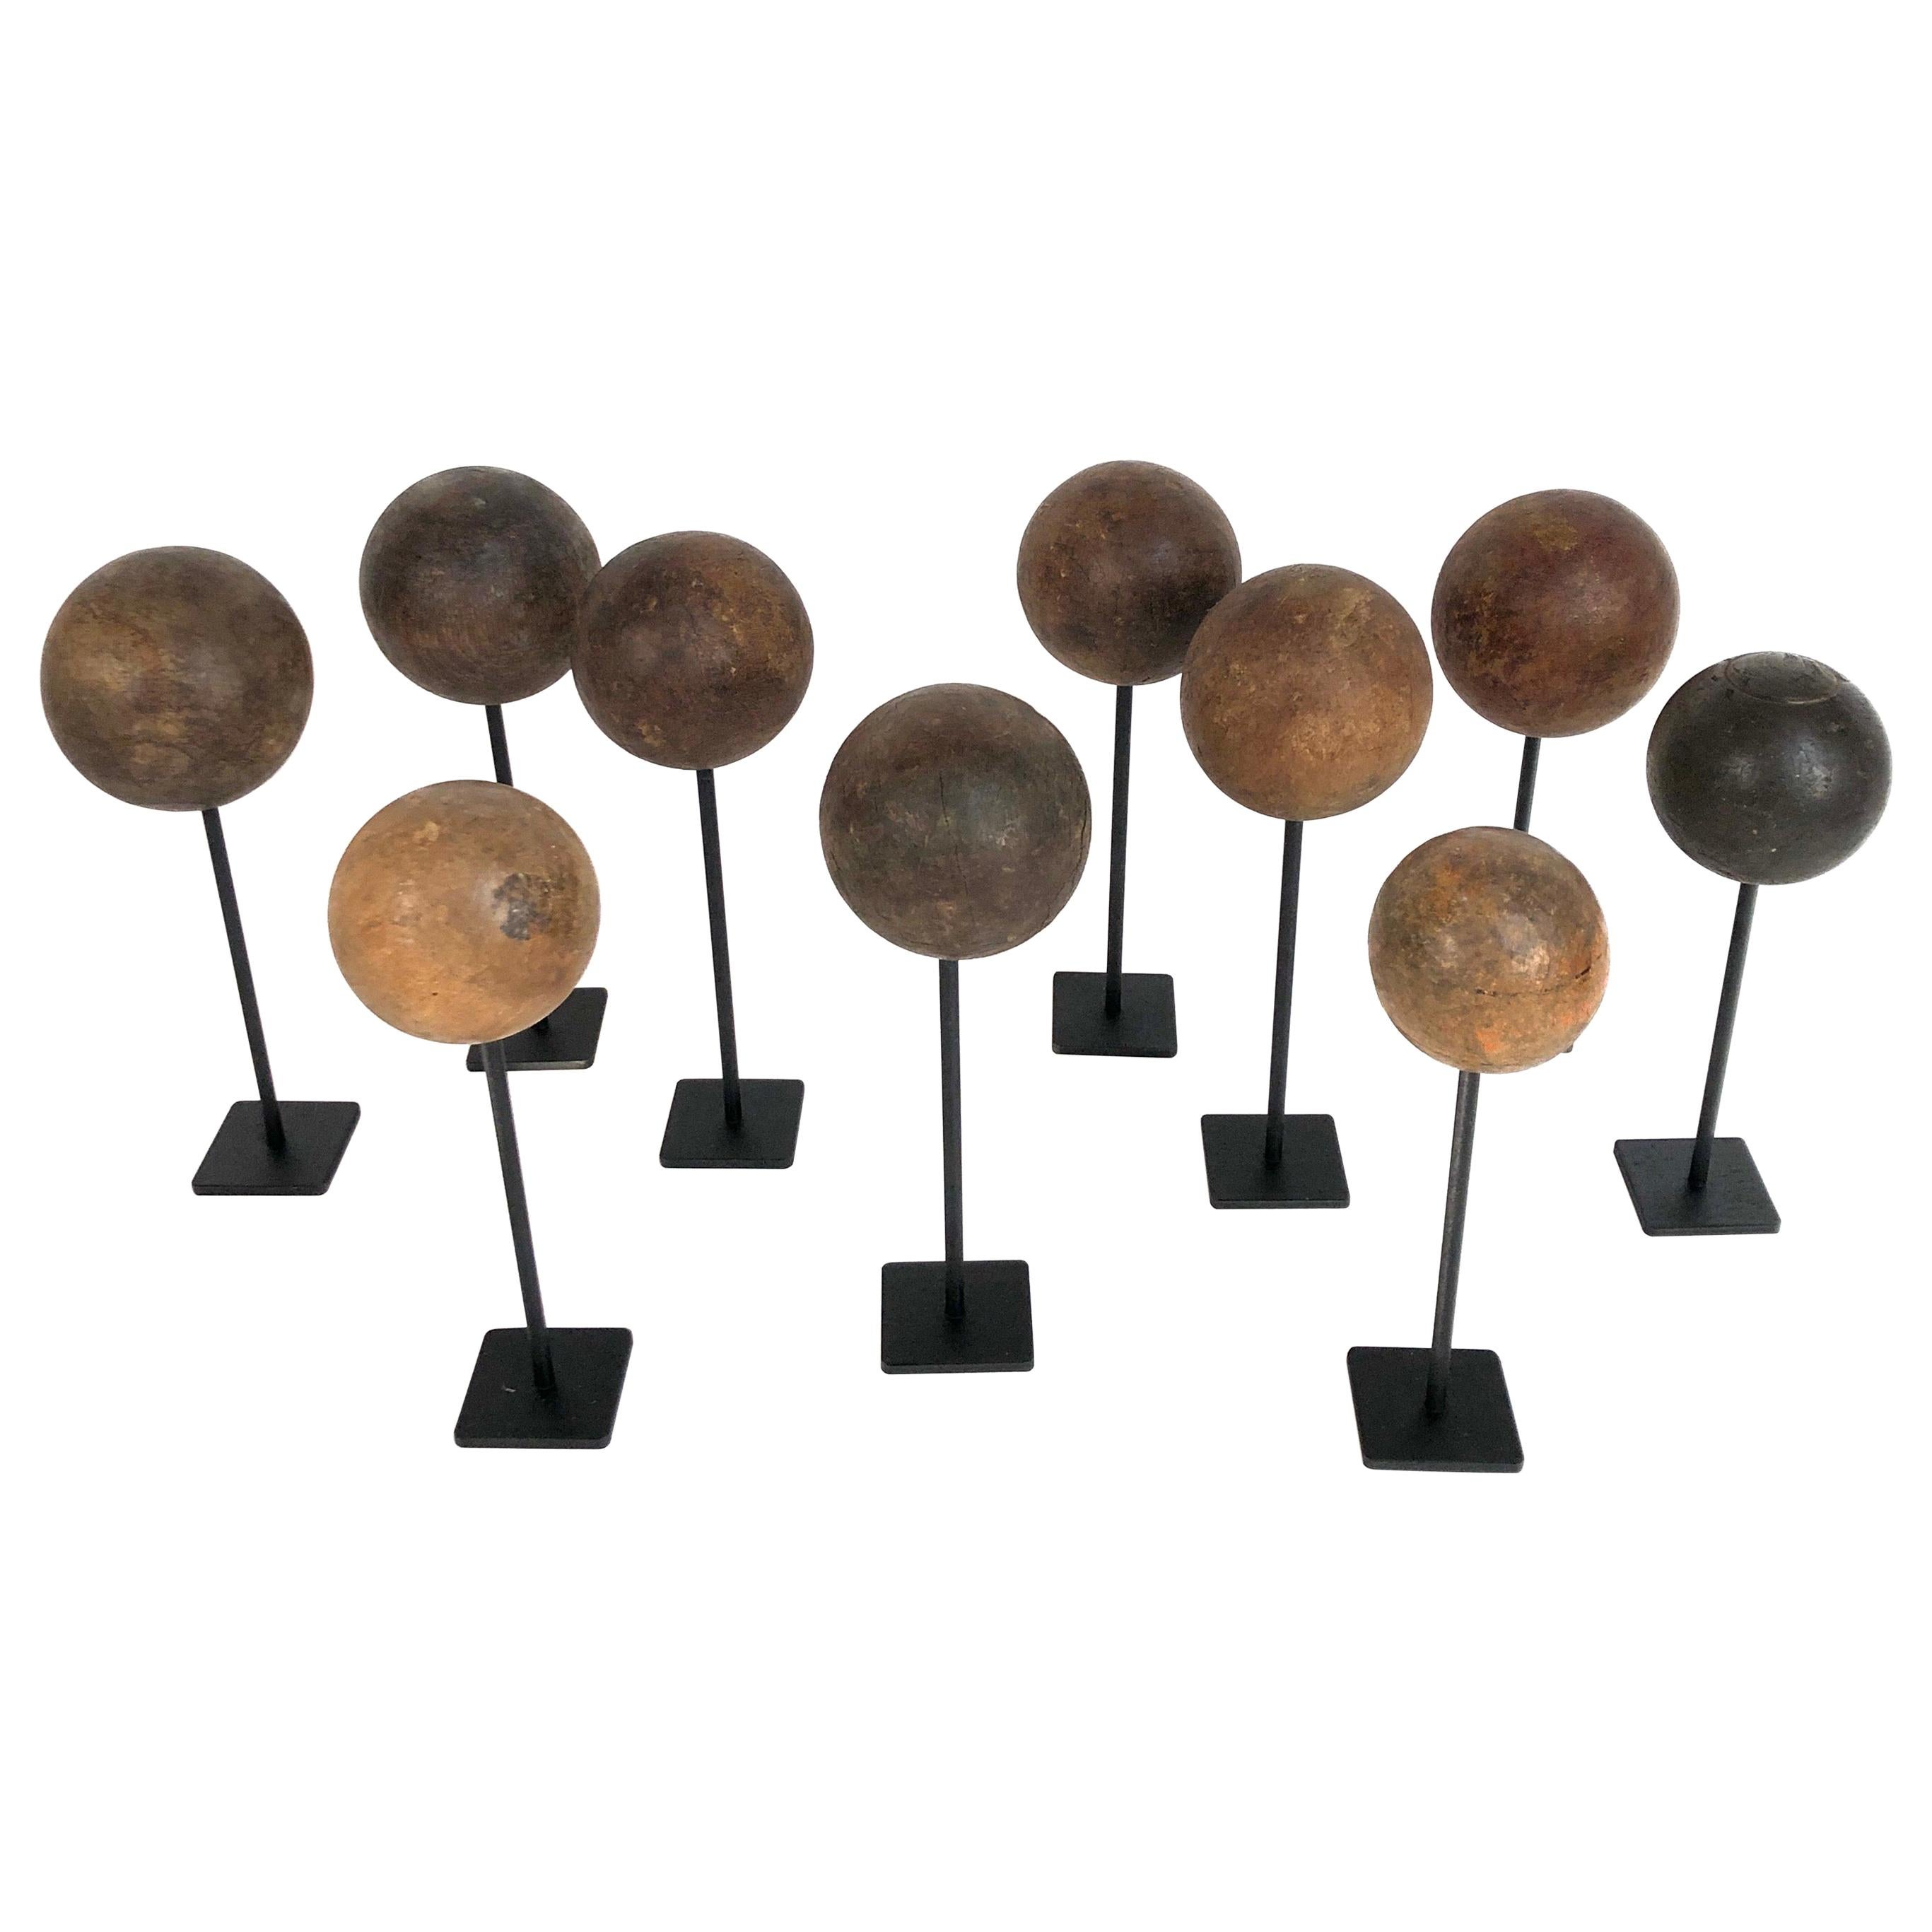 Collection of 10 Custom Mounted Antique Wooden Balls